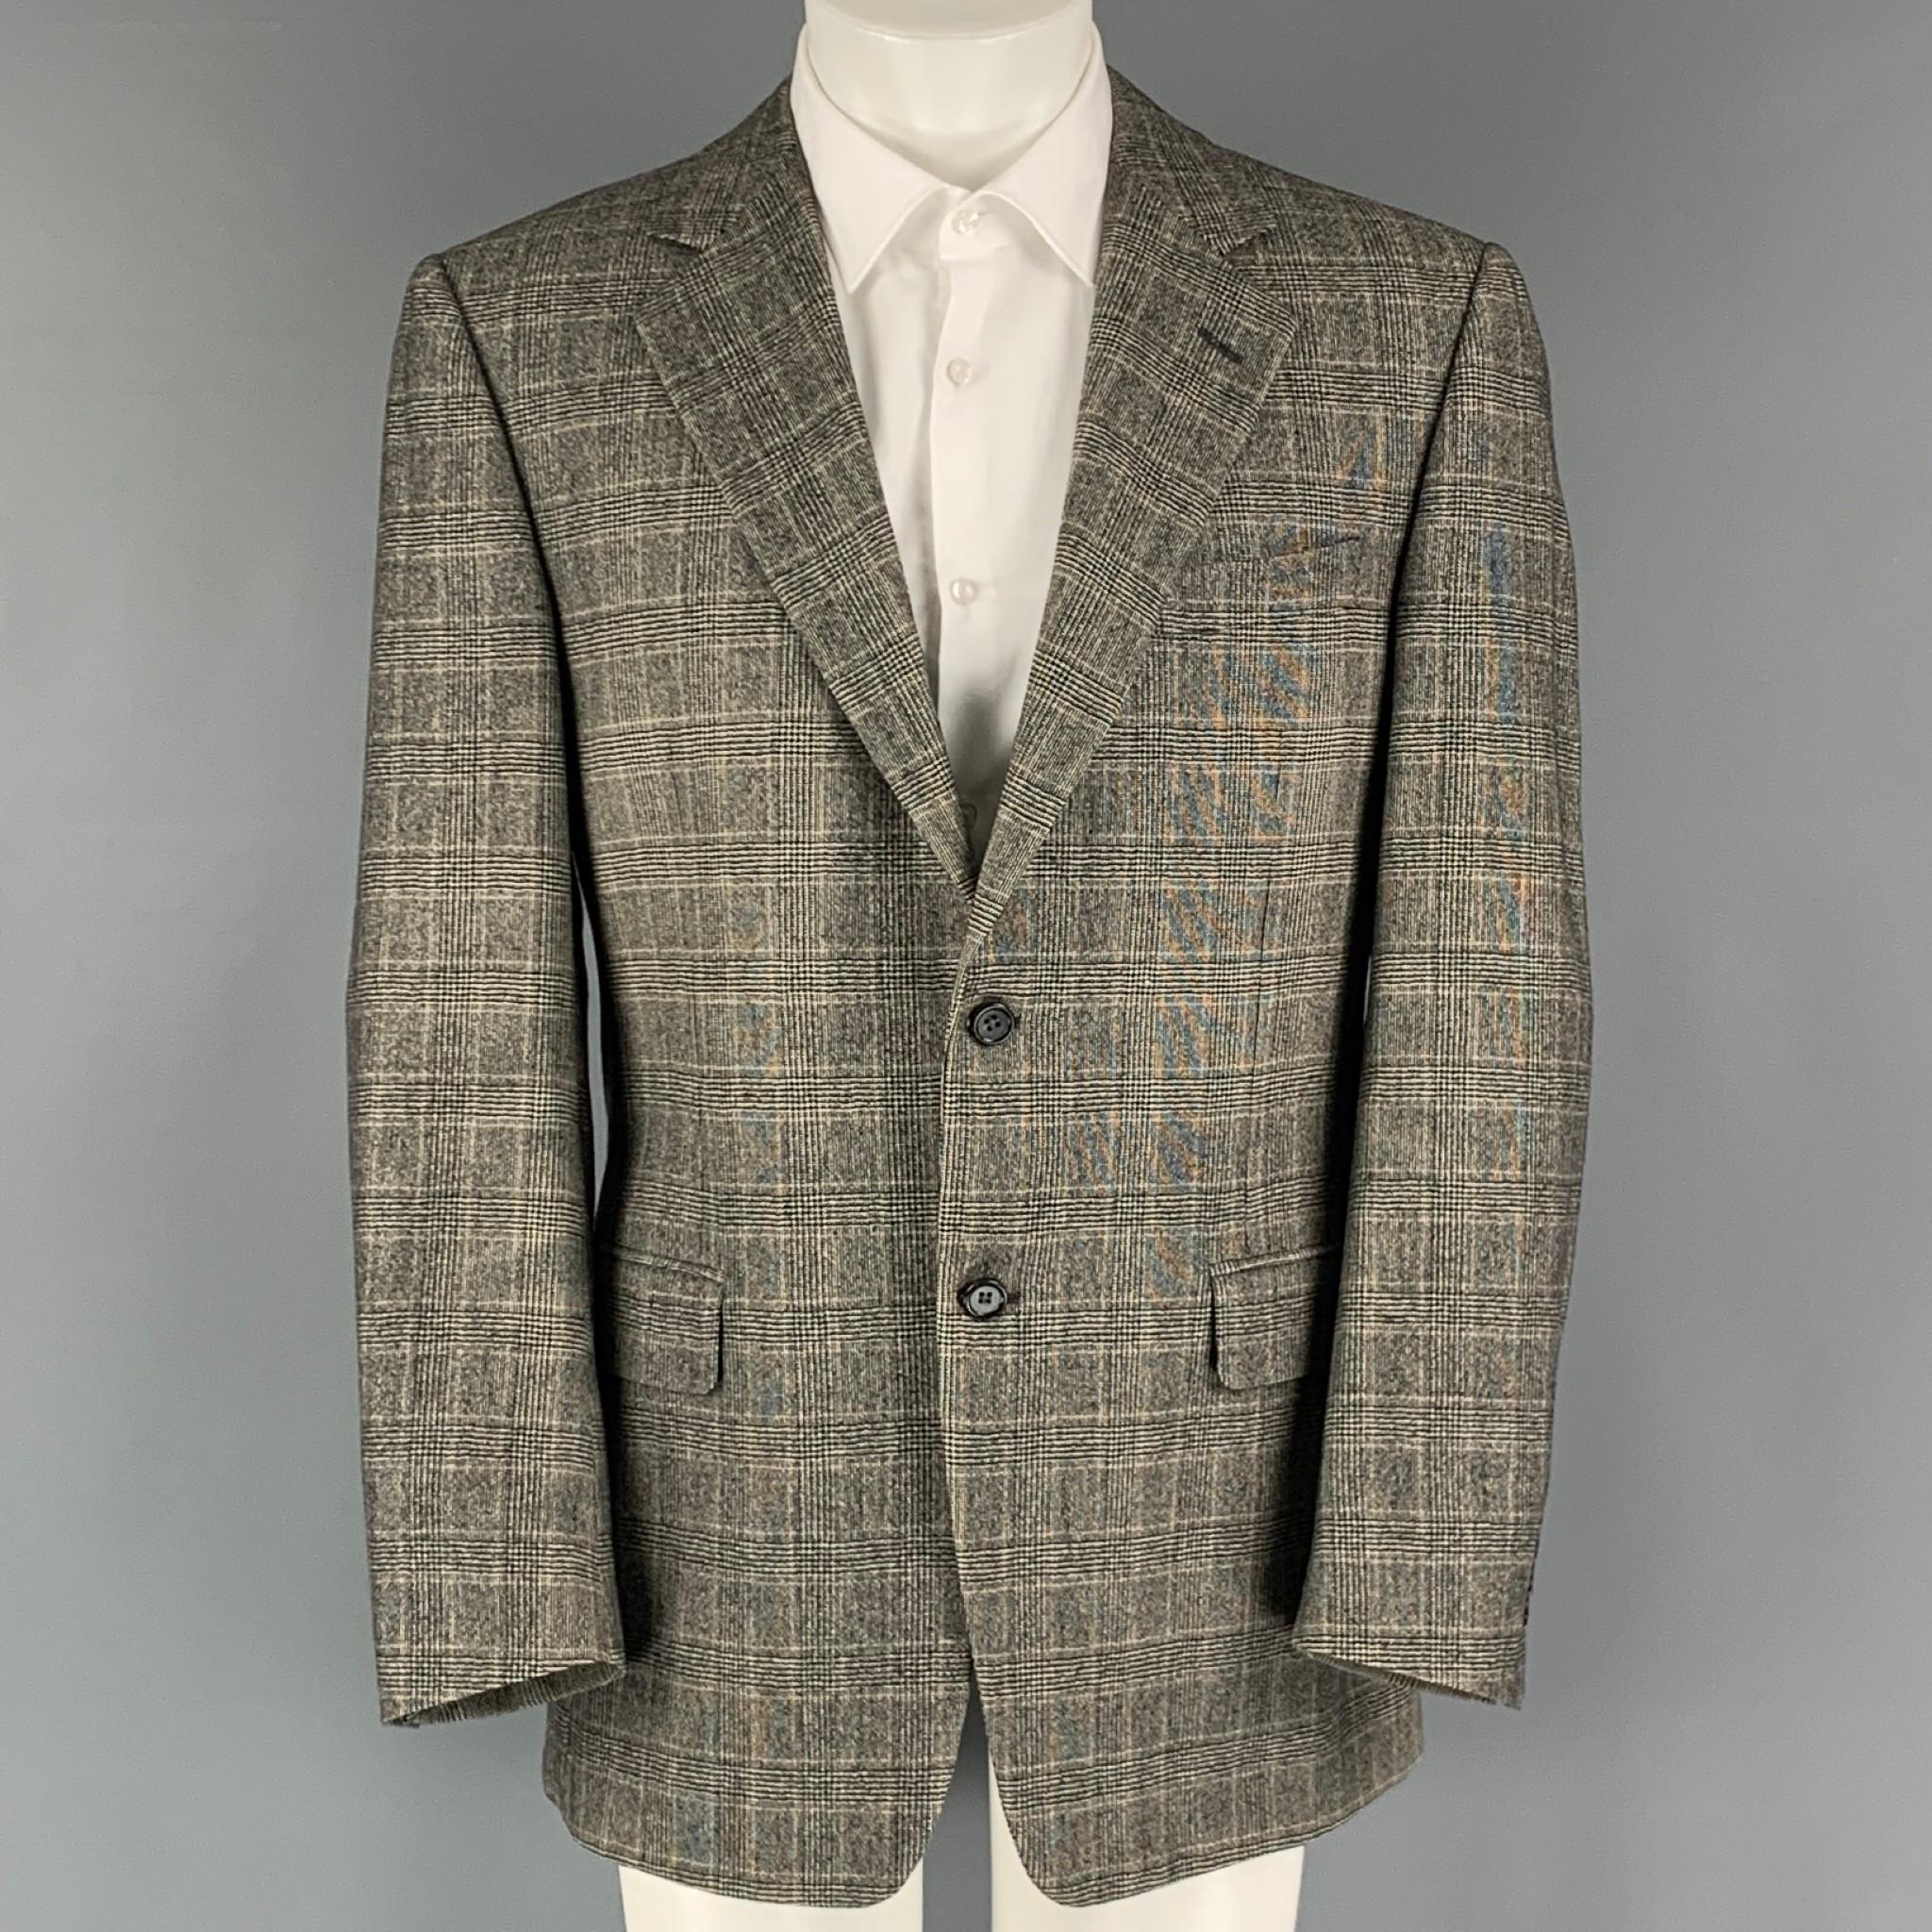 CANALI blazer comes in black and beige glenplaid cashmere material, featuring a notch lapel, flap pockets, 2 buttons closure, single breasted. Made in Italy.

Excellent Pre-Owned Condition.
Marked: 50R IT

Measurements:

Shoulder: 19 in.
Chest: 44